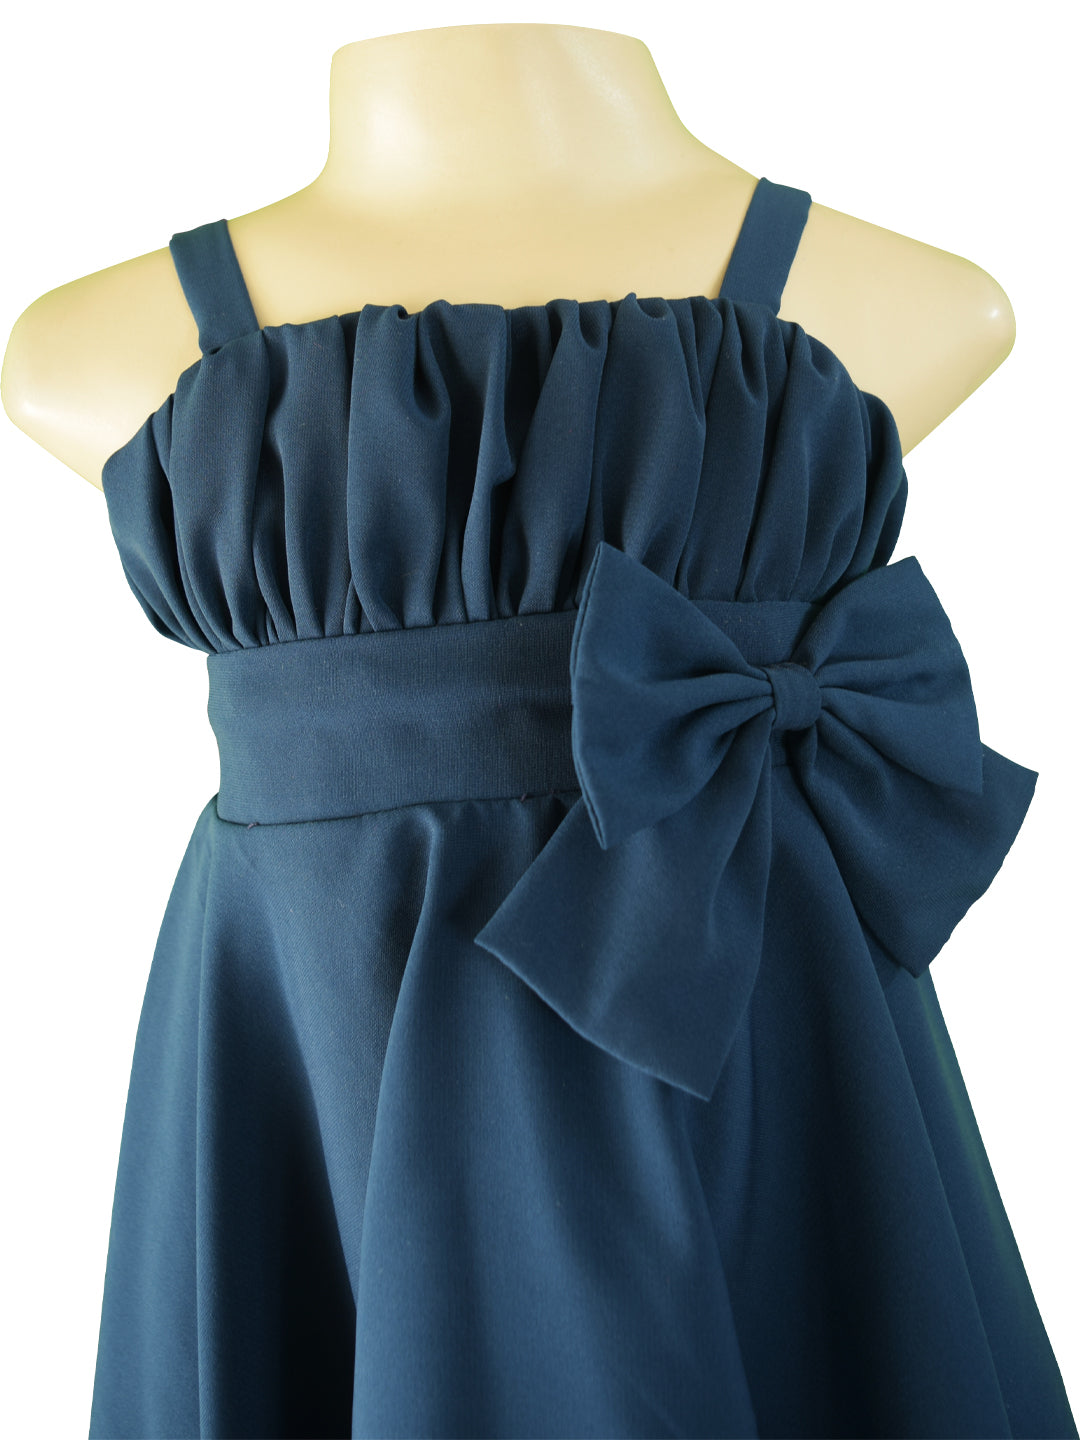 Dress for Kids_Faye Teal Green Strappy Dress